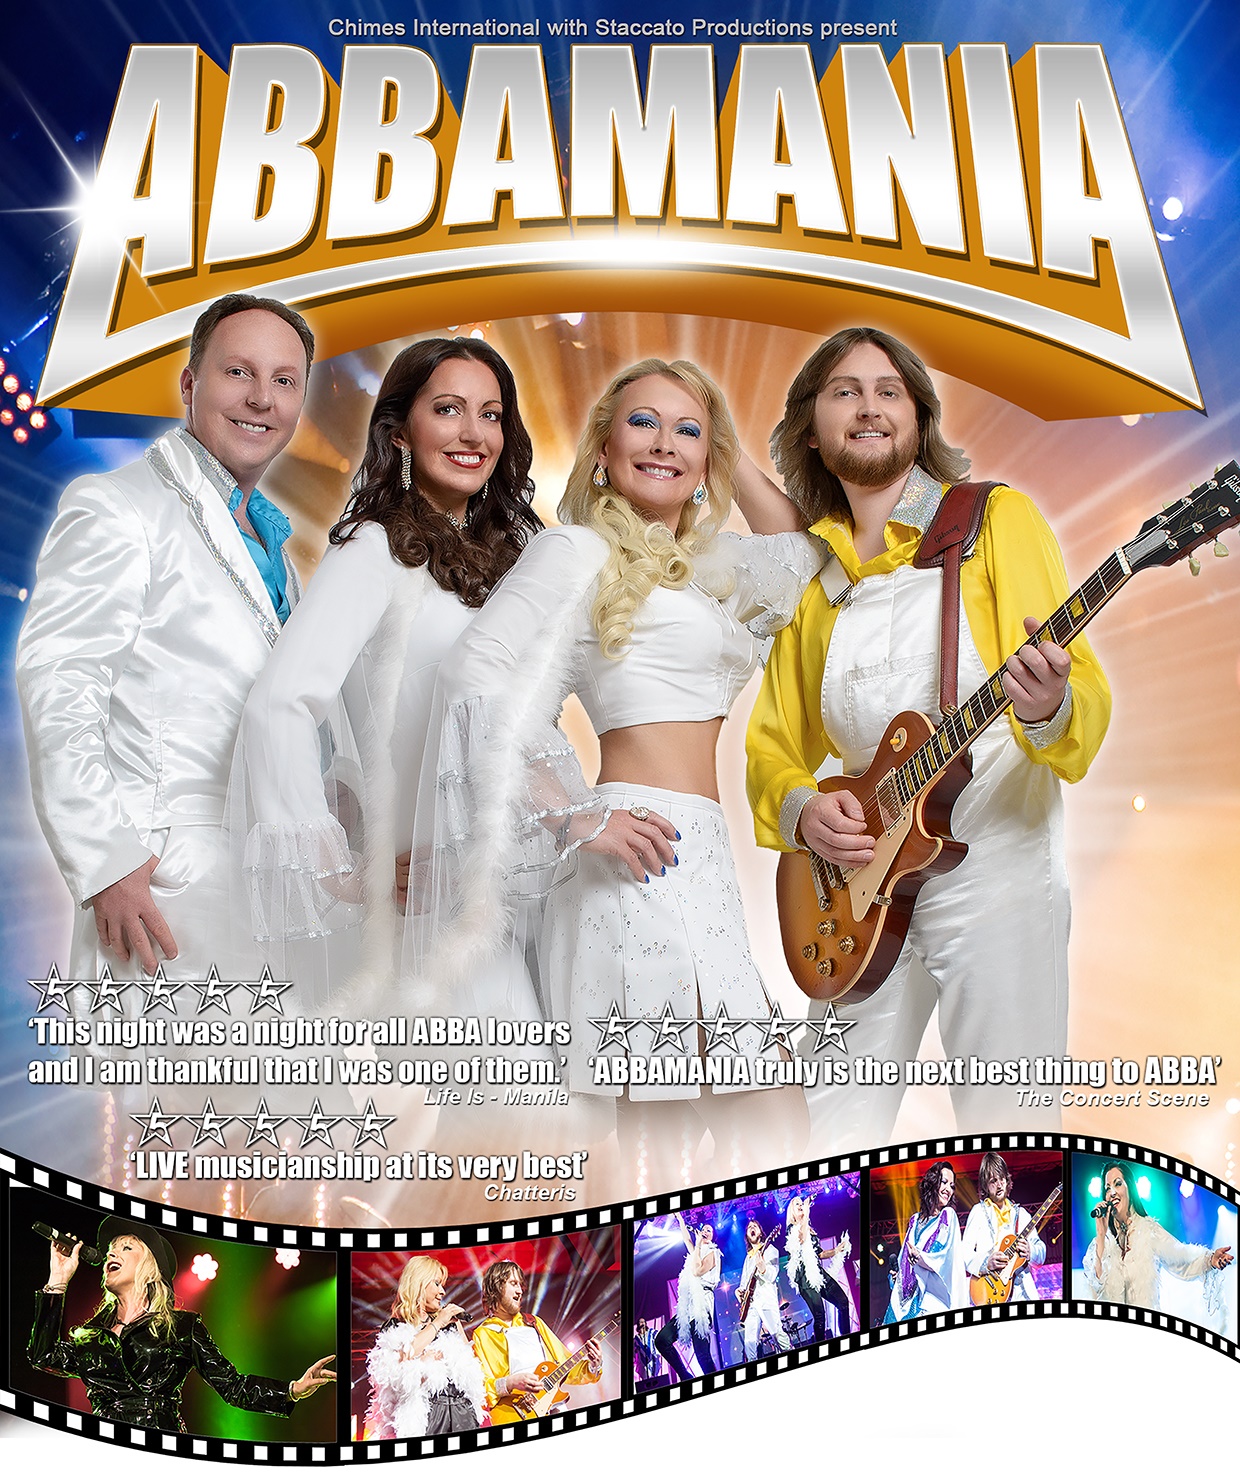 ABBAMANIA – A band ‘Bjorn’ to play their heroes 🗓